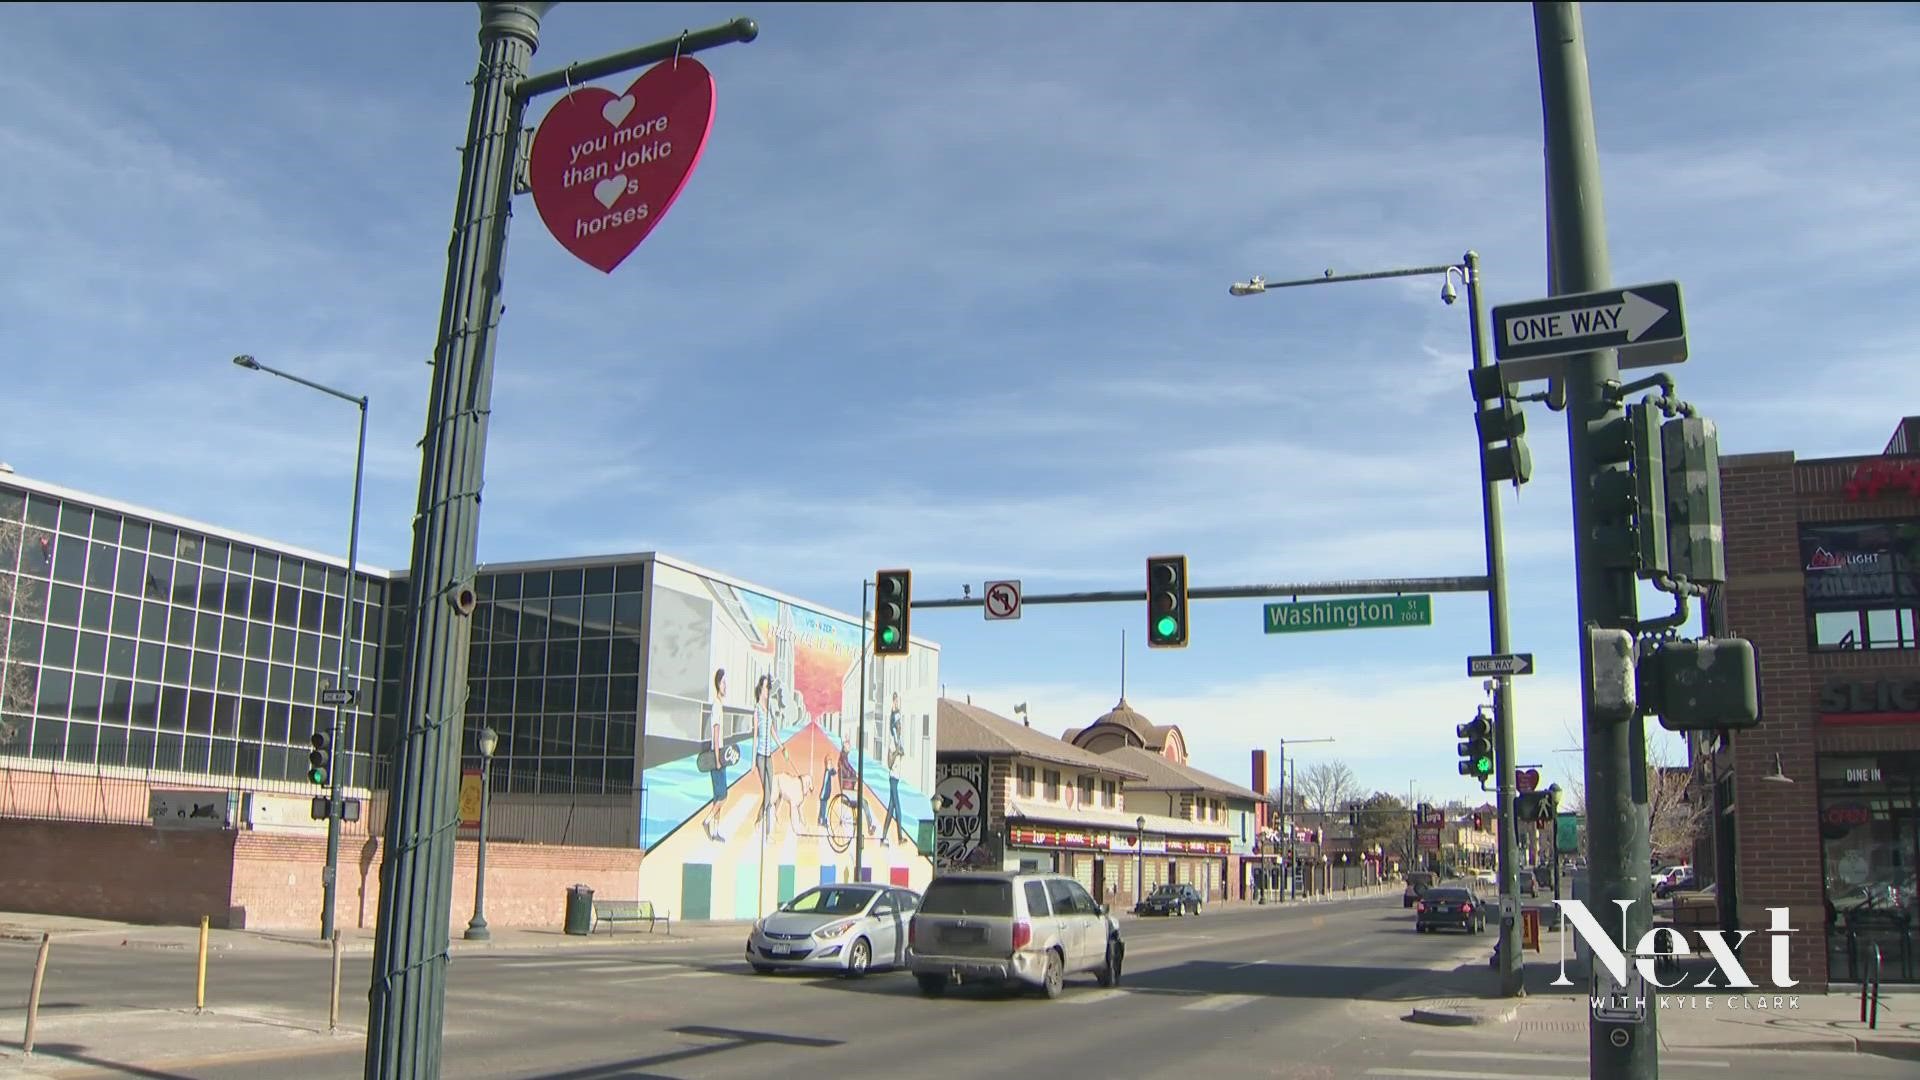 Maybe you've seen the love notes hanging from street signs on Colfax between Grant and Josephine. All that affection got Next's Bryan Wendland feeling reflective.